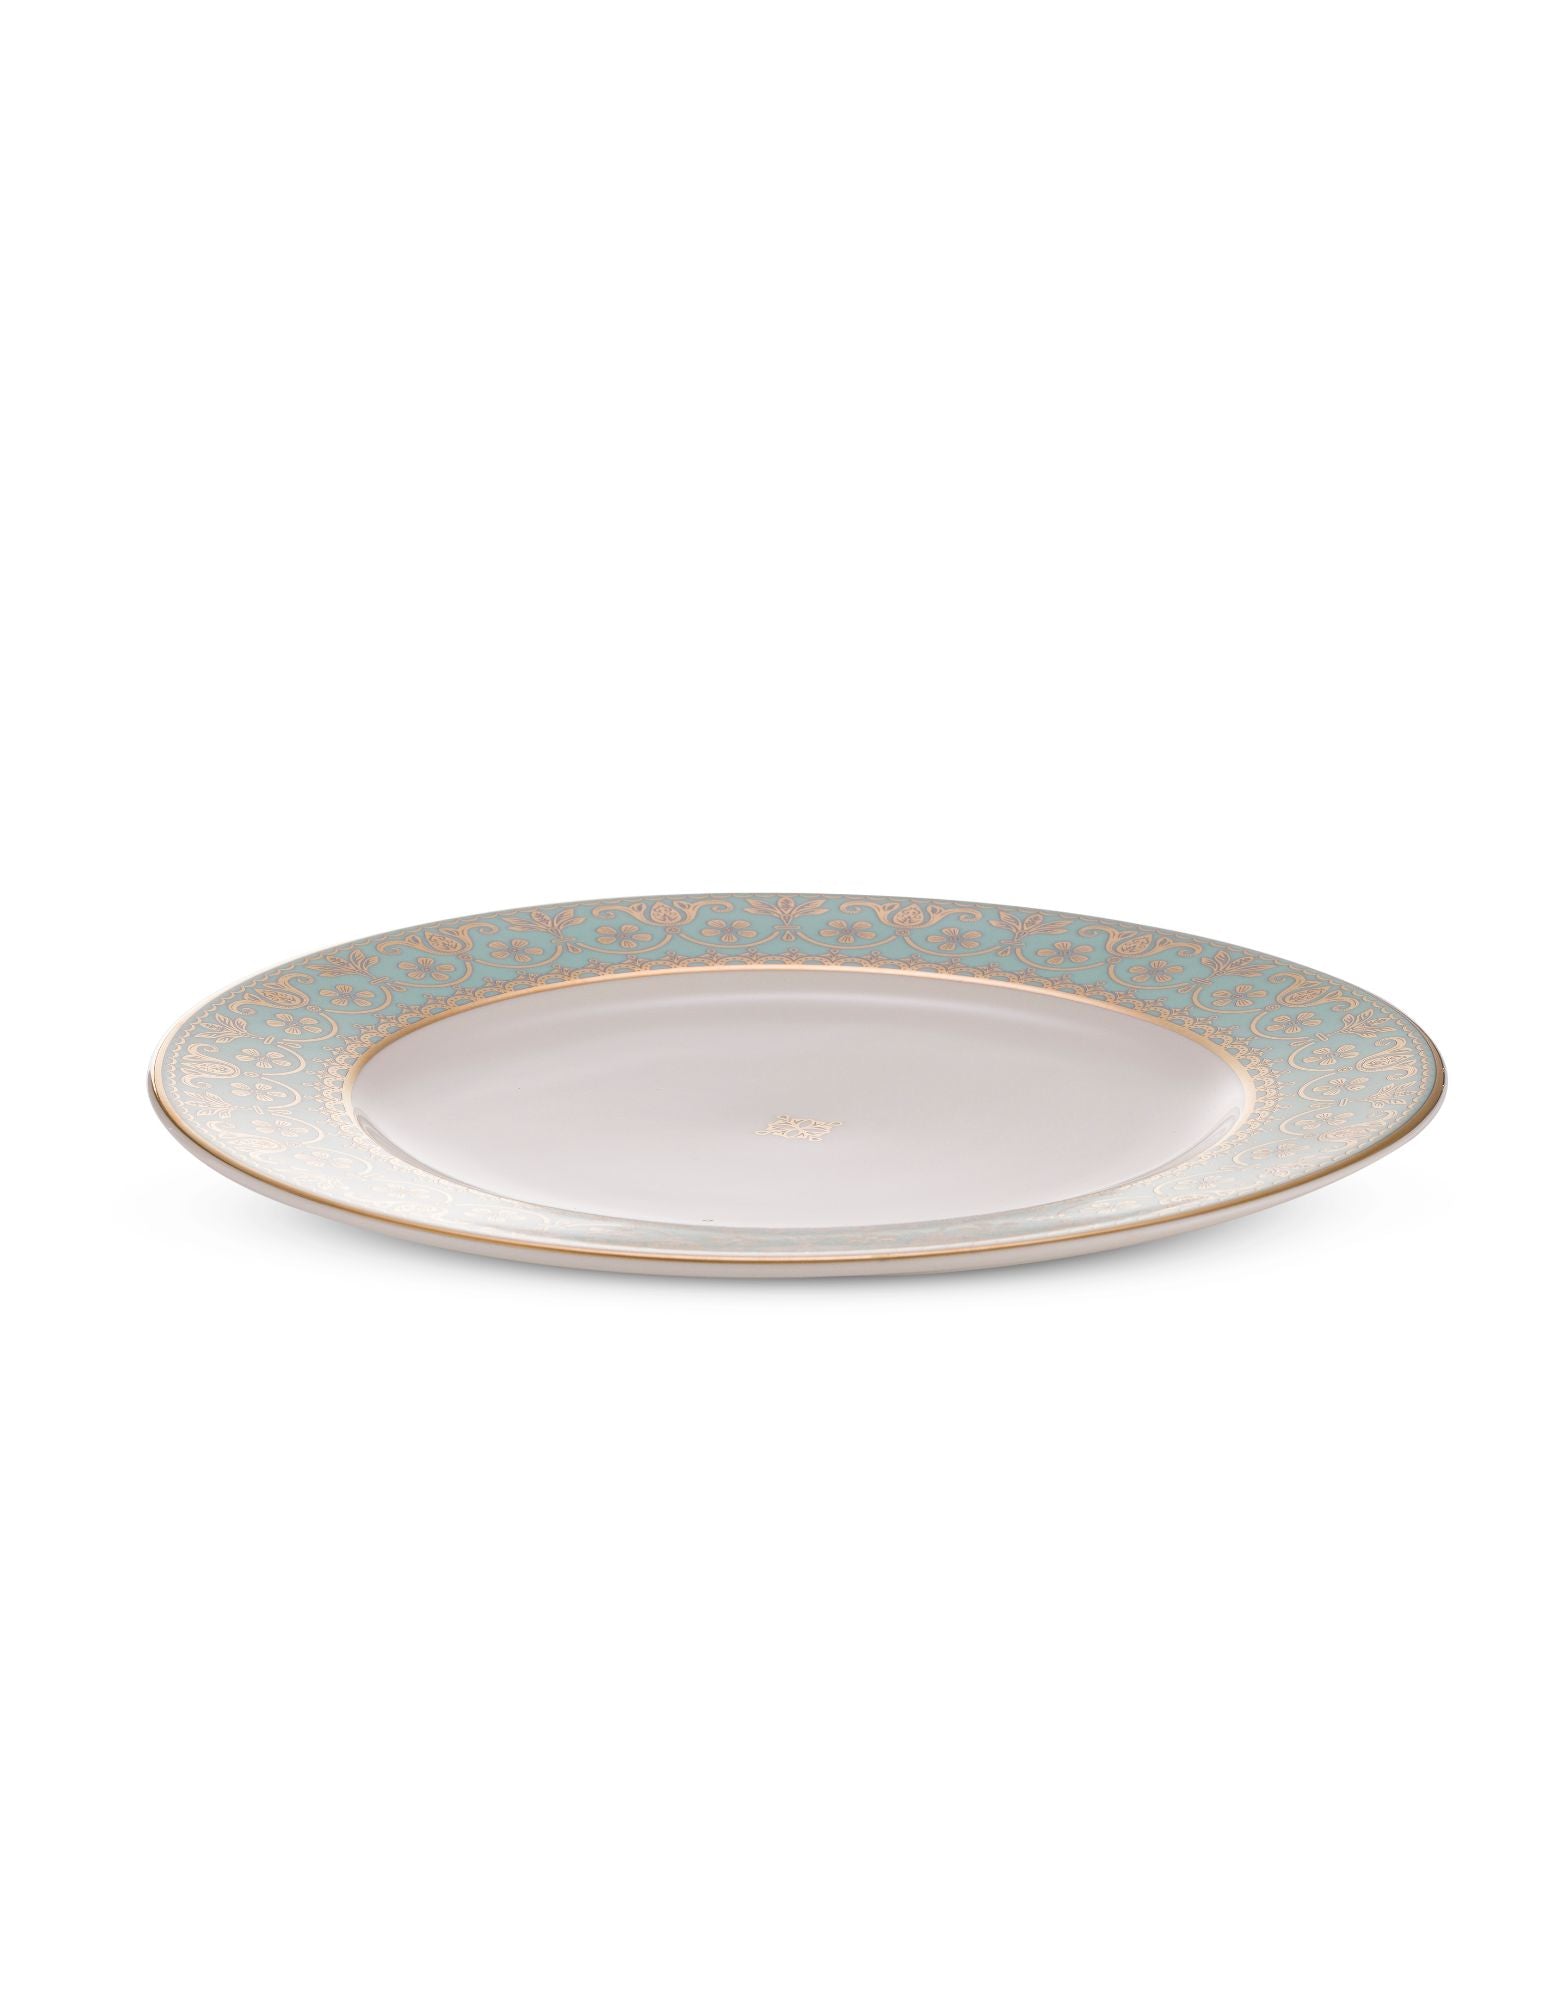 Oman collection's Dinner plate